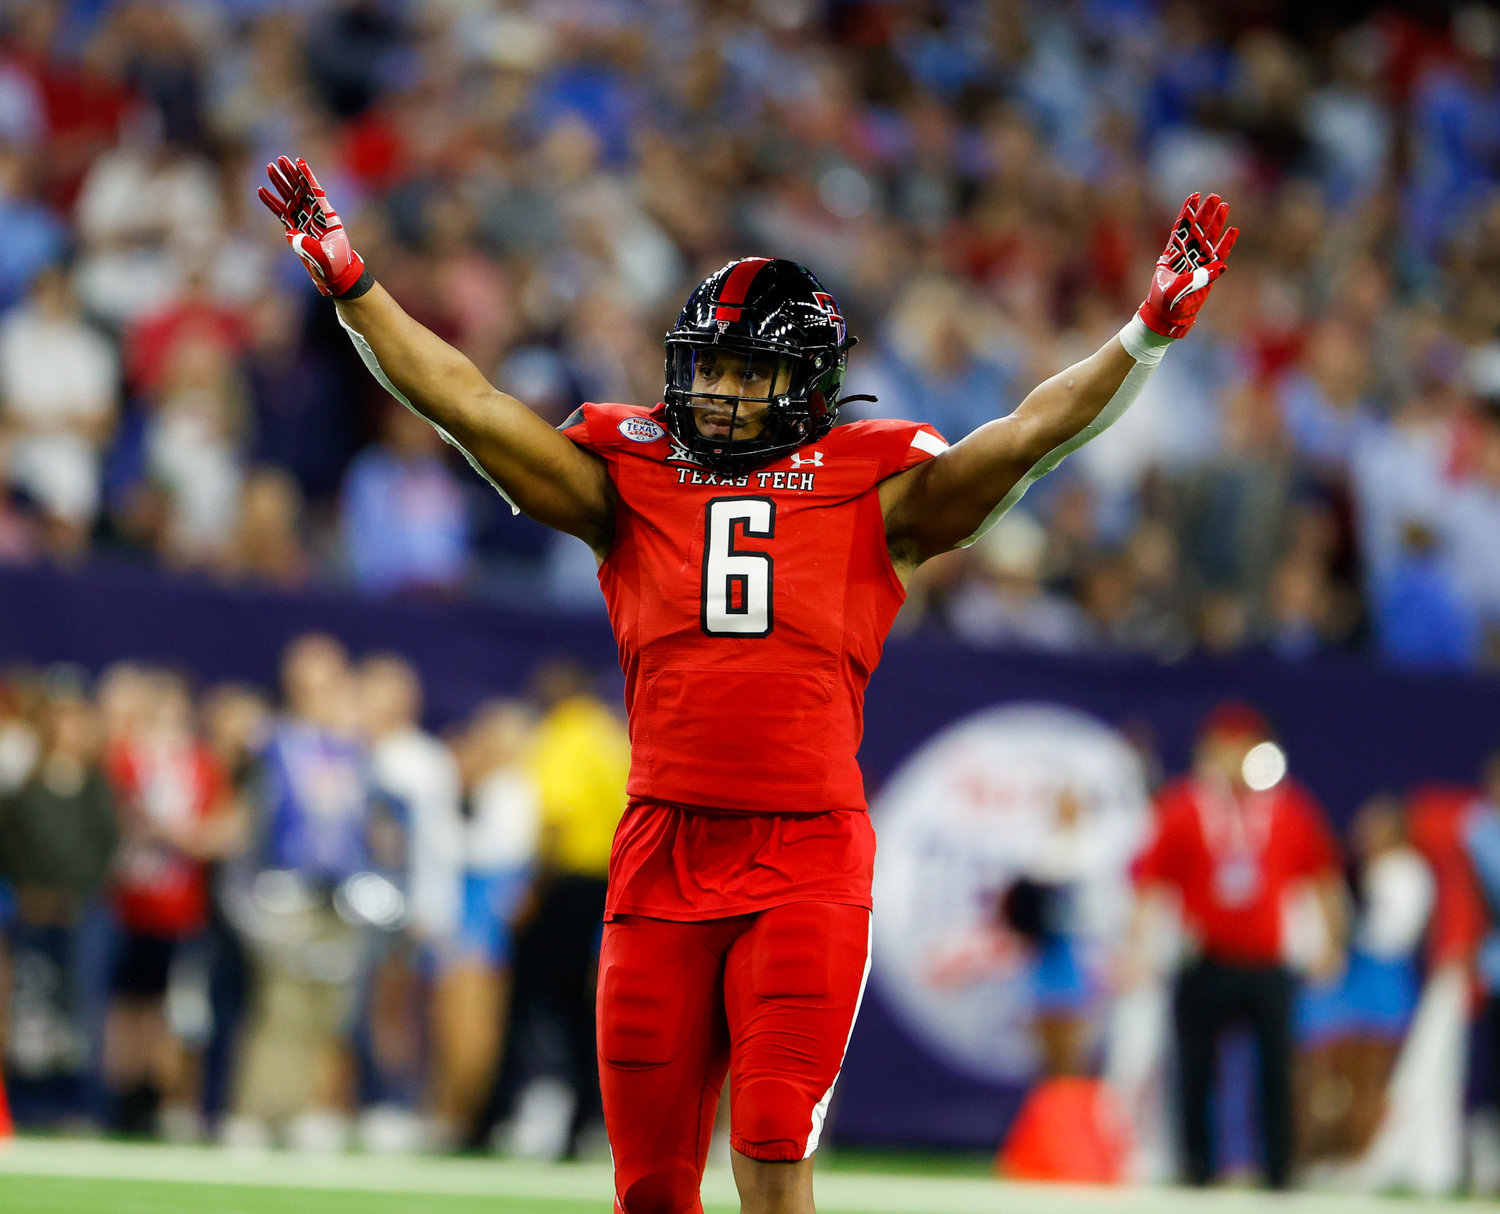 Texas Tech linebacker Kosi Eldridge (6) gestures after a defensive stop on fourth down during the TaxAct Texas Bowl on Dec. 28, 2022 in Houston.